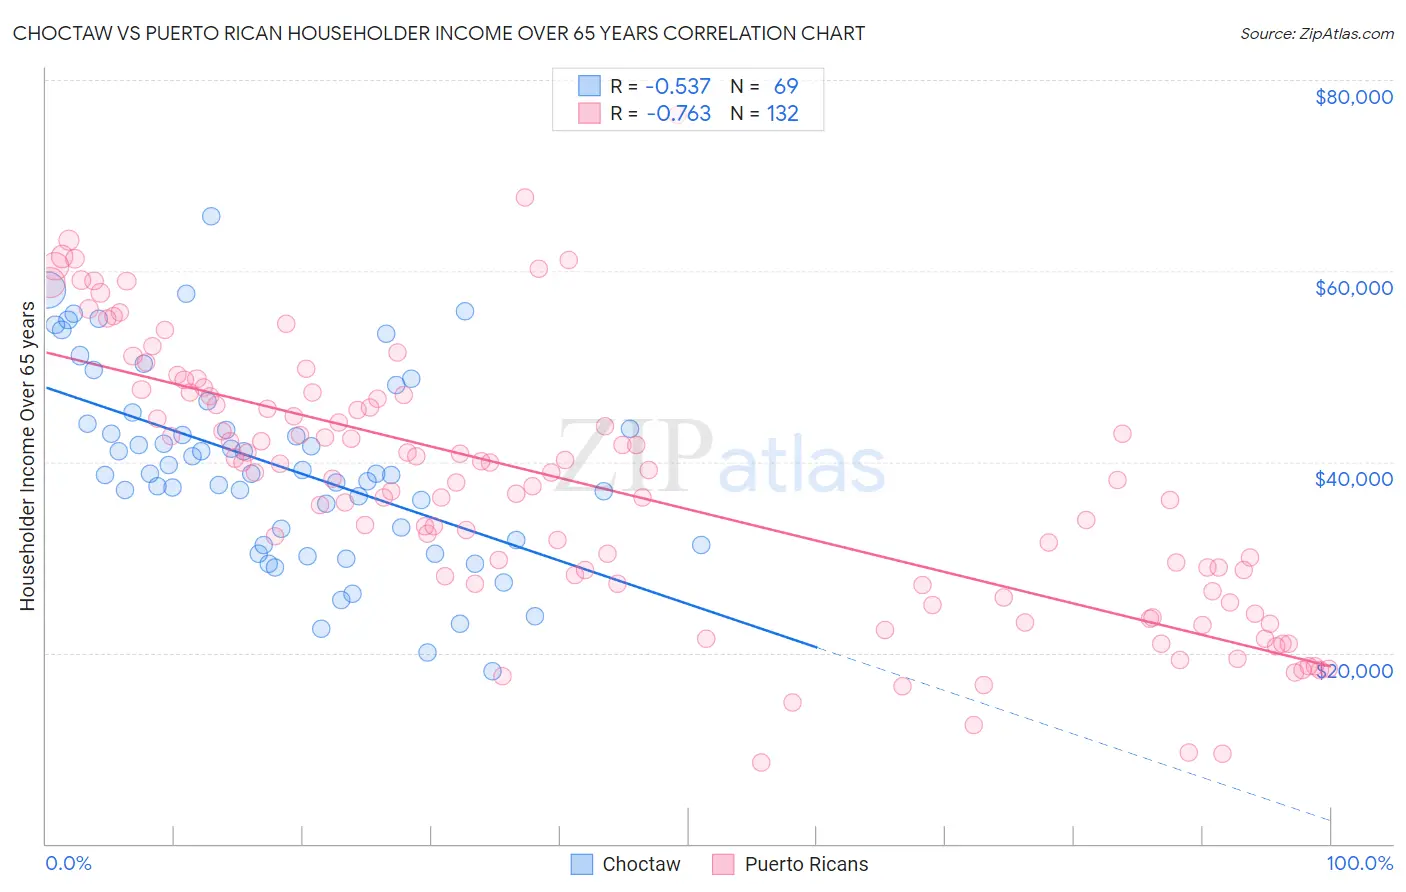 Choctaw vs Puerto Rican Householder Income Over 65 years